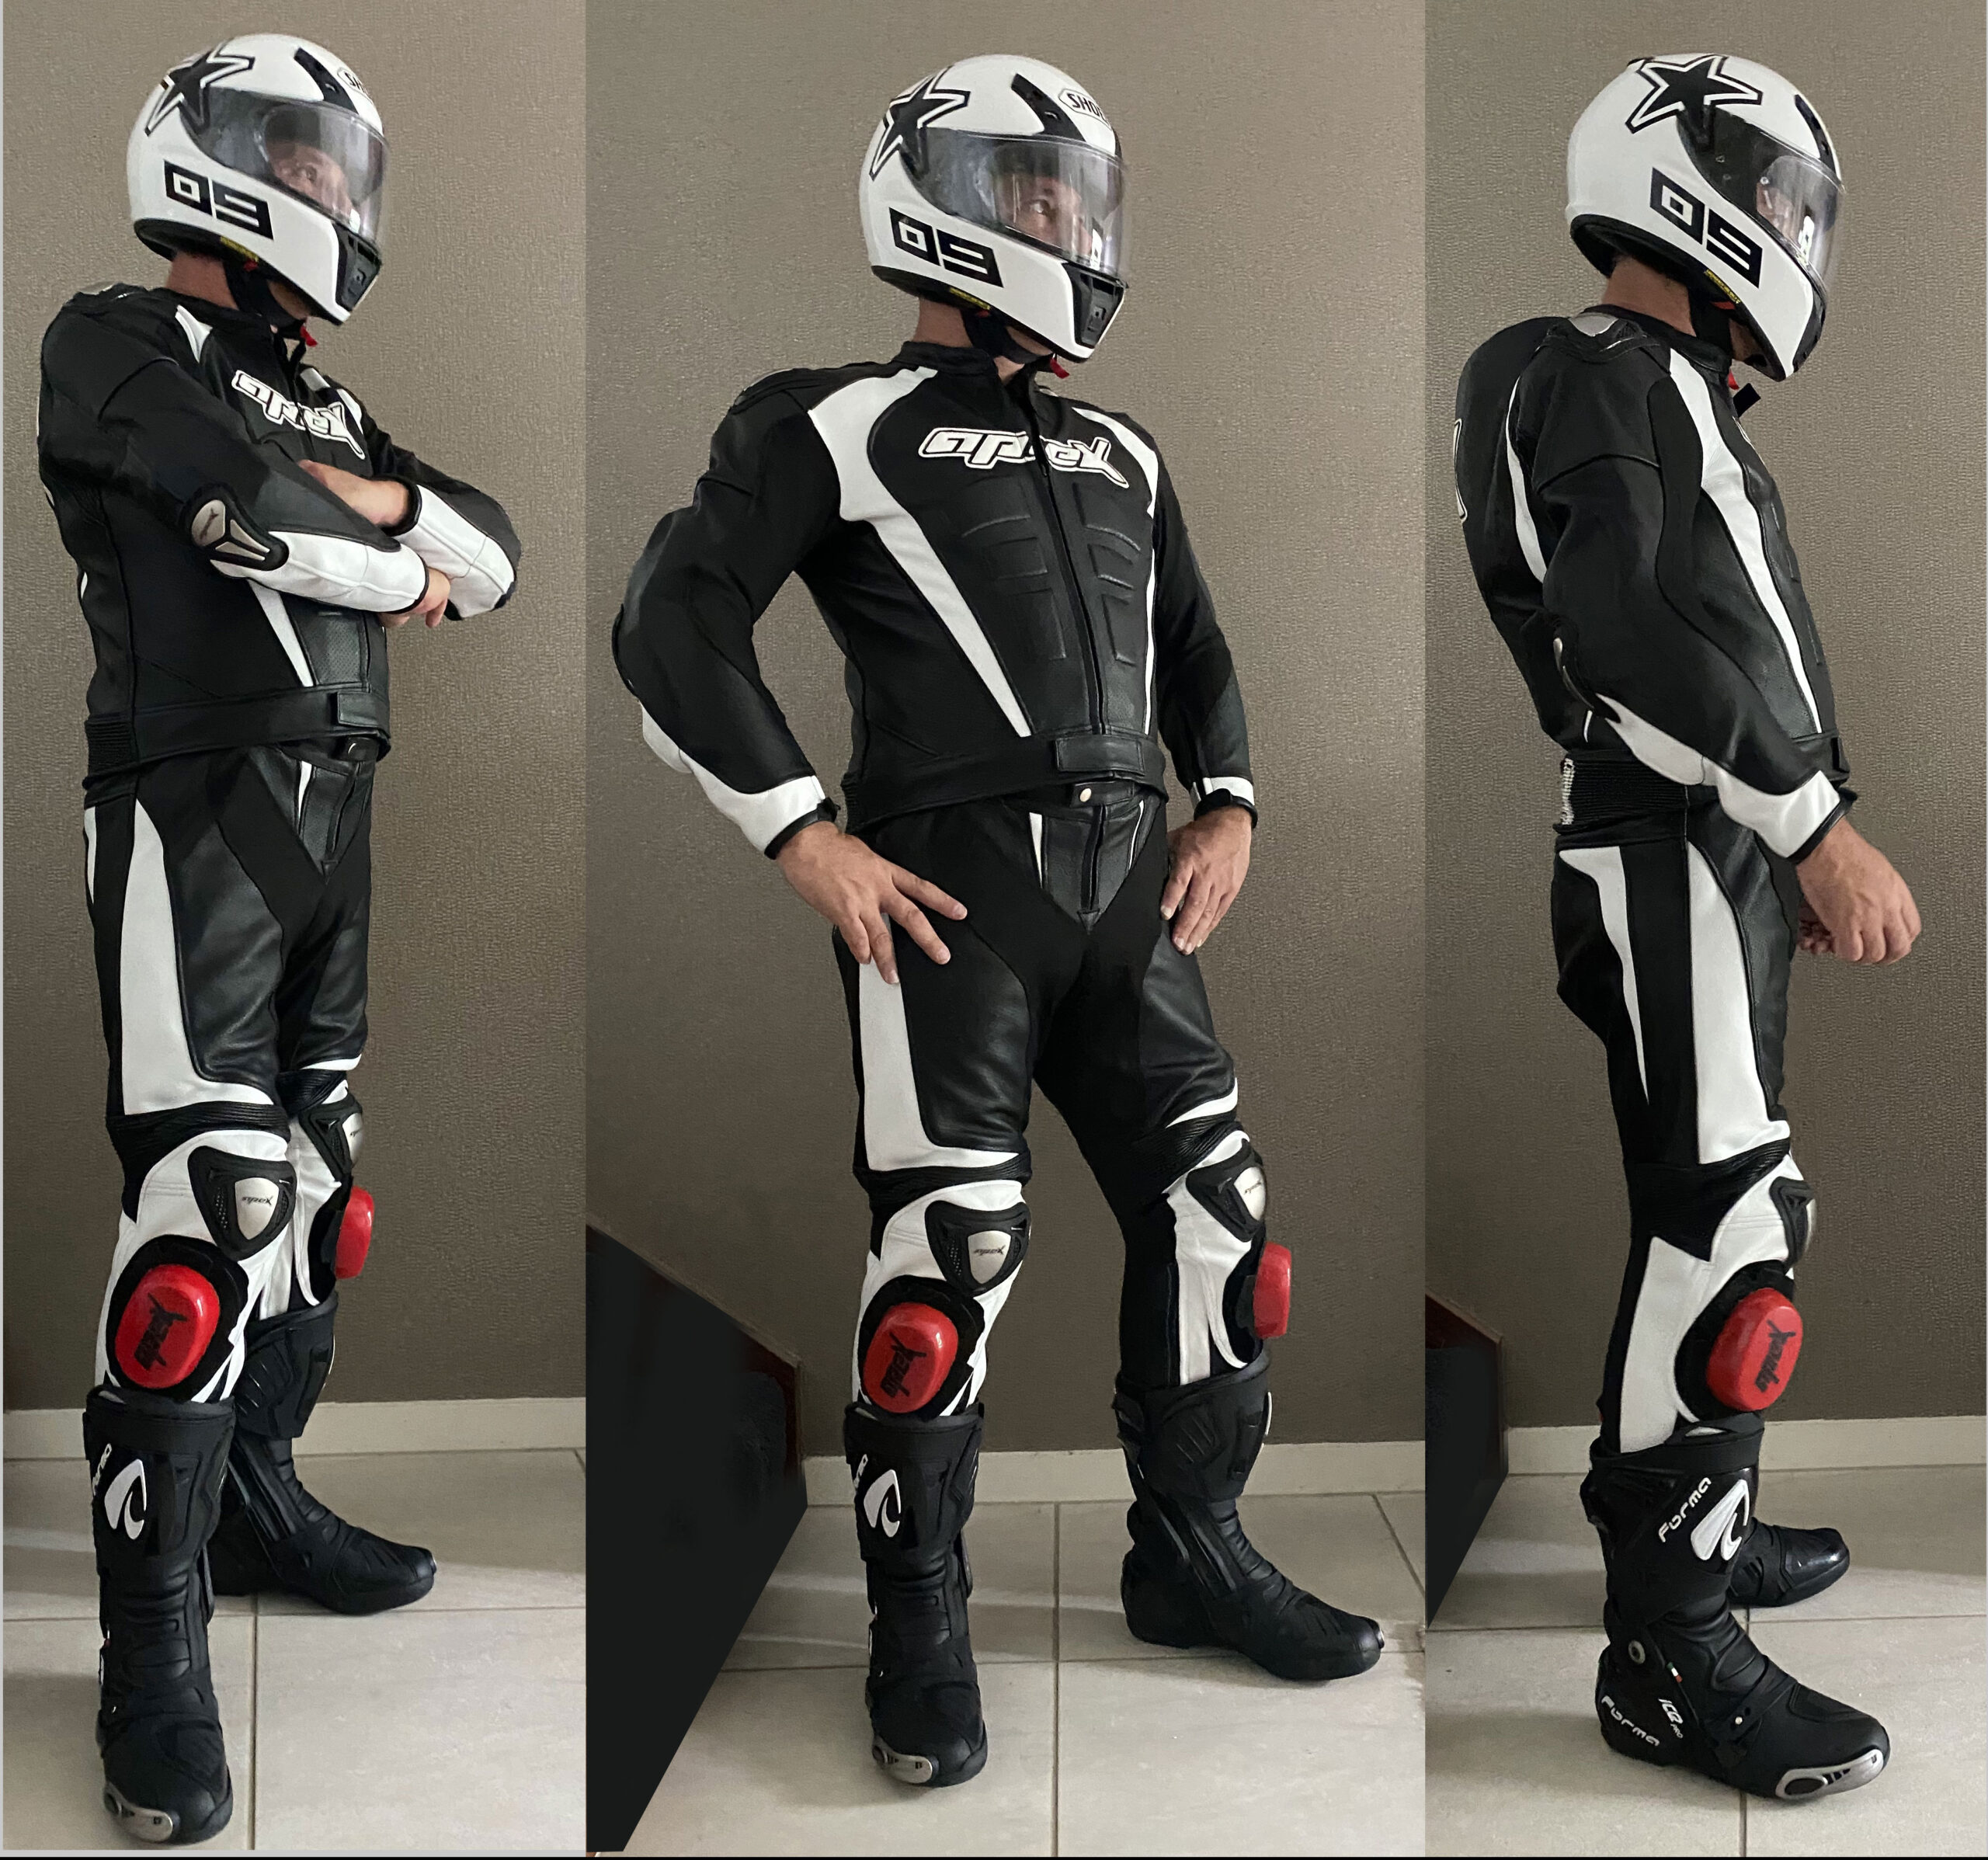 Apexcorsa Brand – Motorcycle road and racing leathers